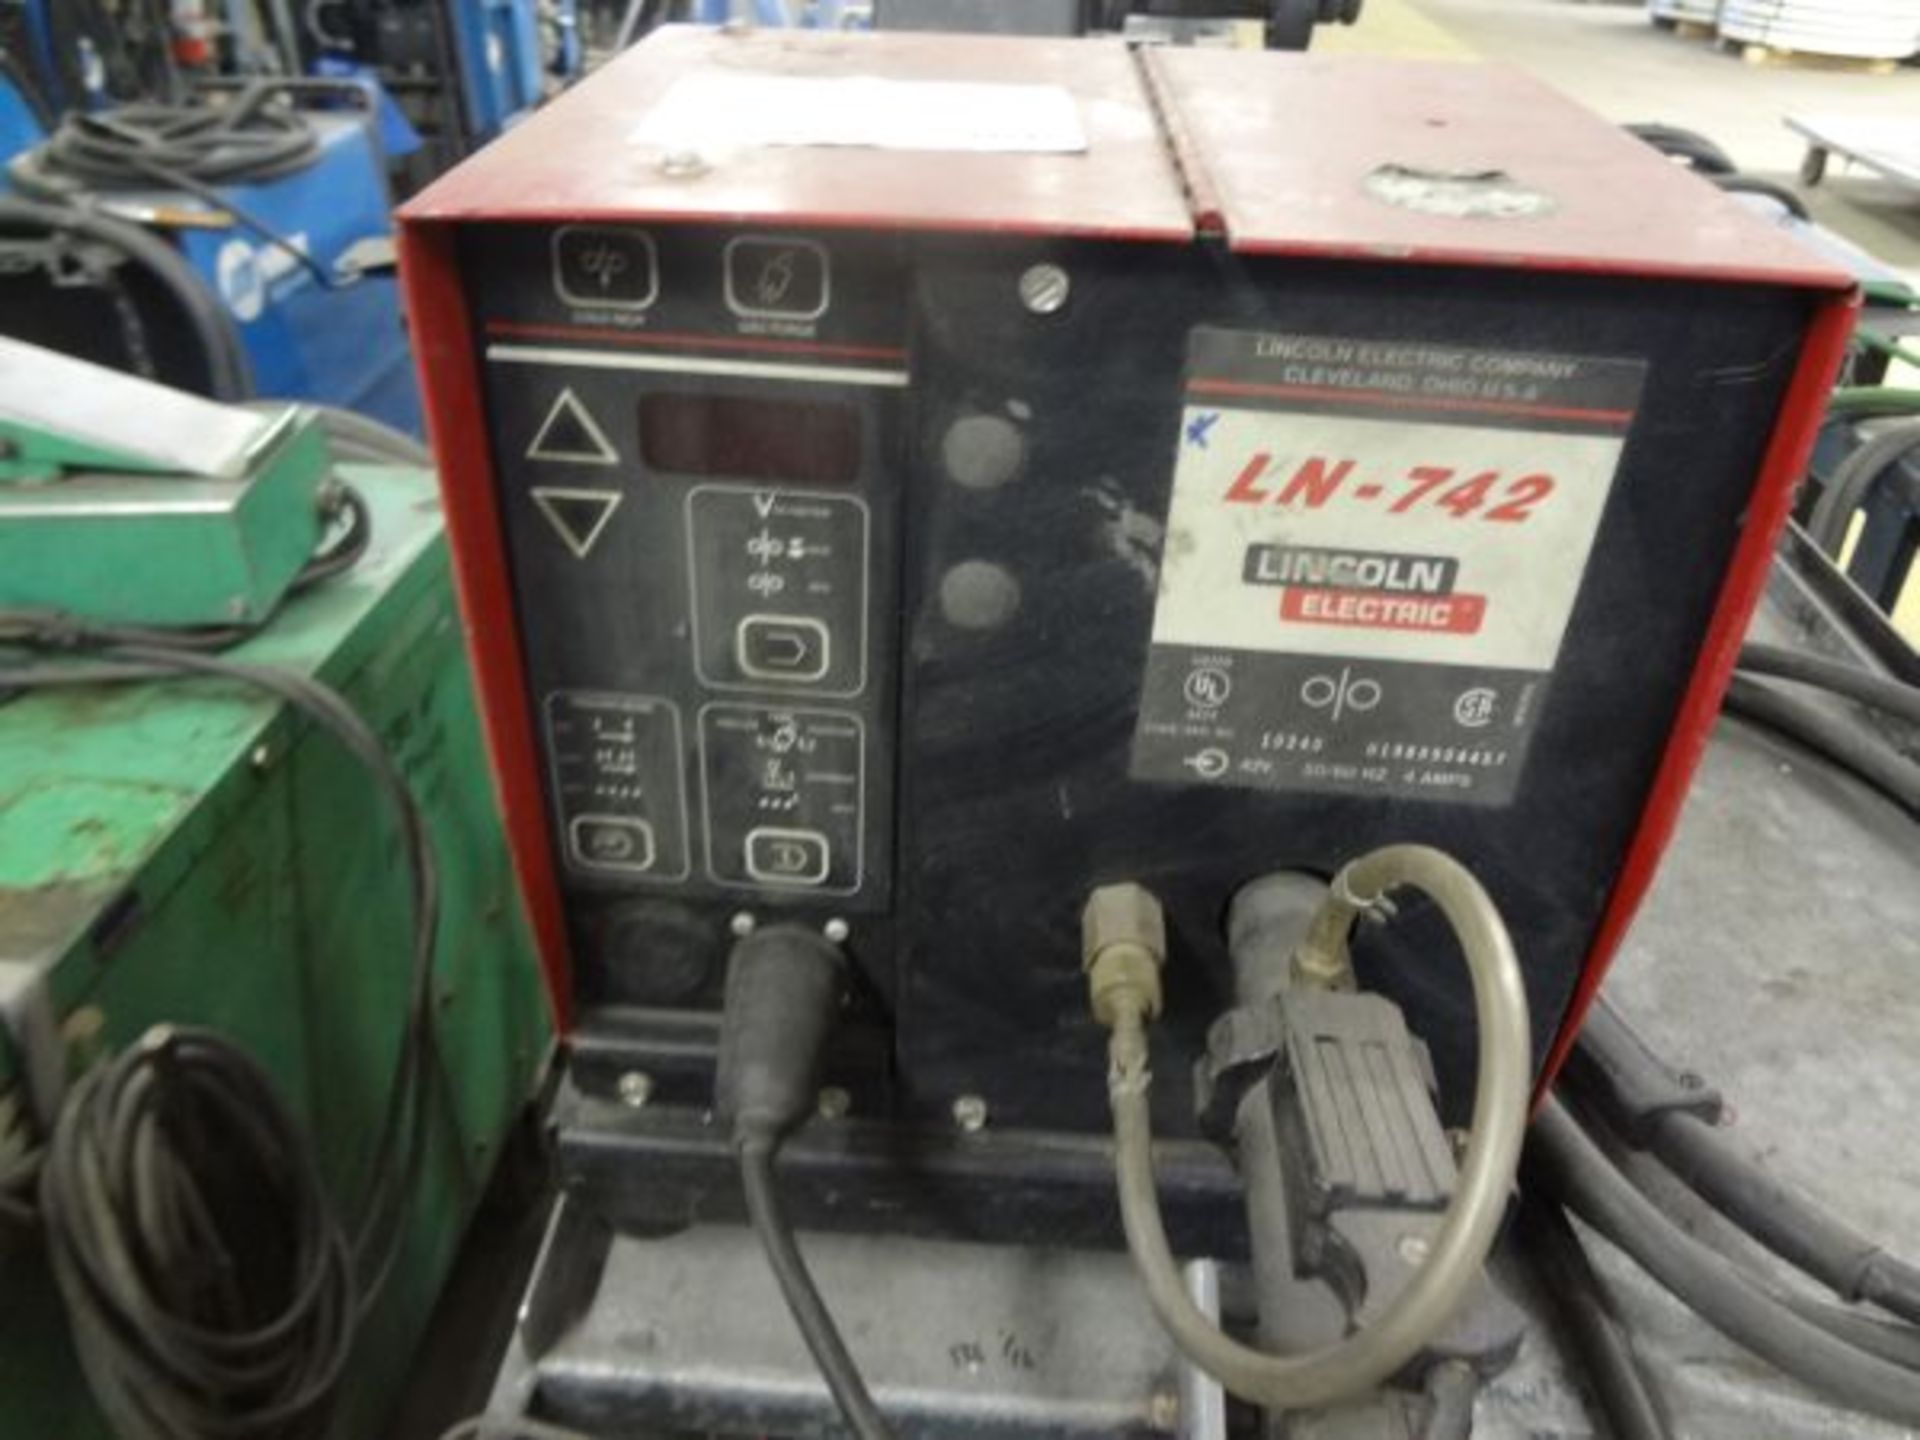 250 AMP LINCOLN INVERTEC STTII WELDER; S/N U1980400085, WITH LINCOLN LN-742 WIRE FEEDER - Image 5 of 5